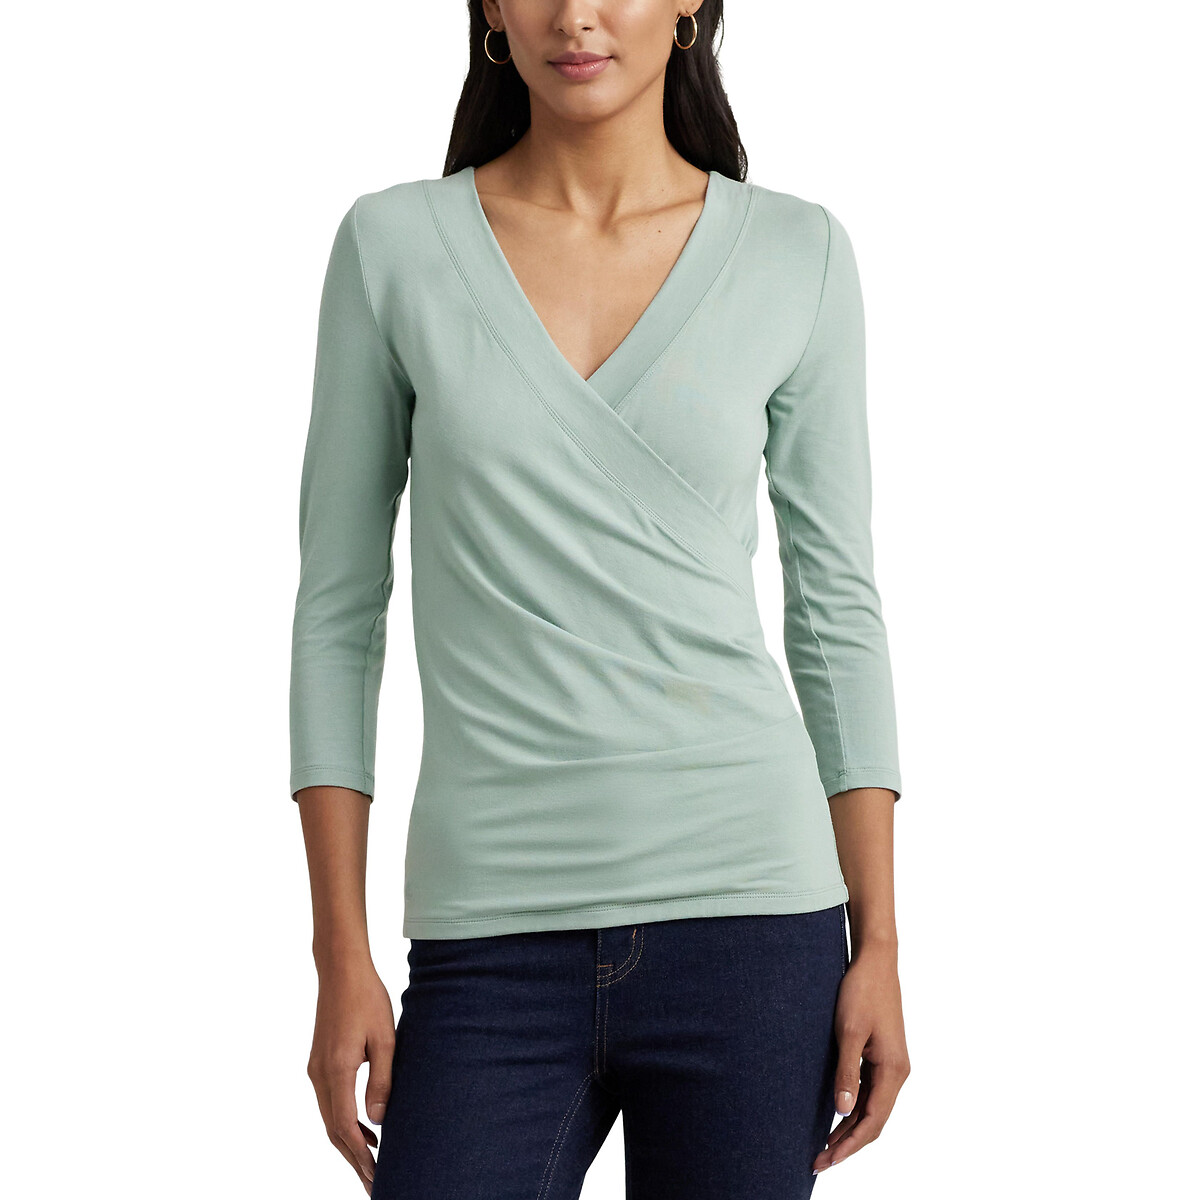 Image of Alayja T-Shirt with Crossover V-Neck and 3/4 Length Sleeves